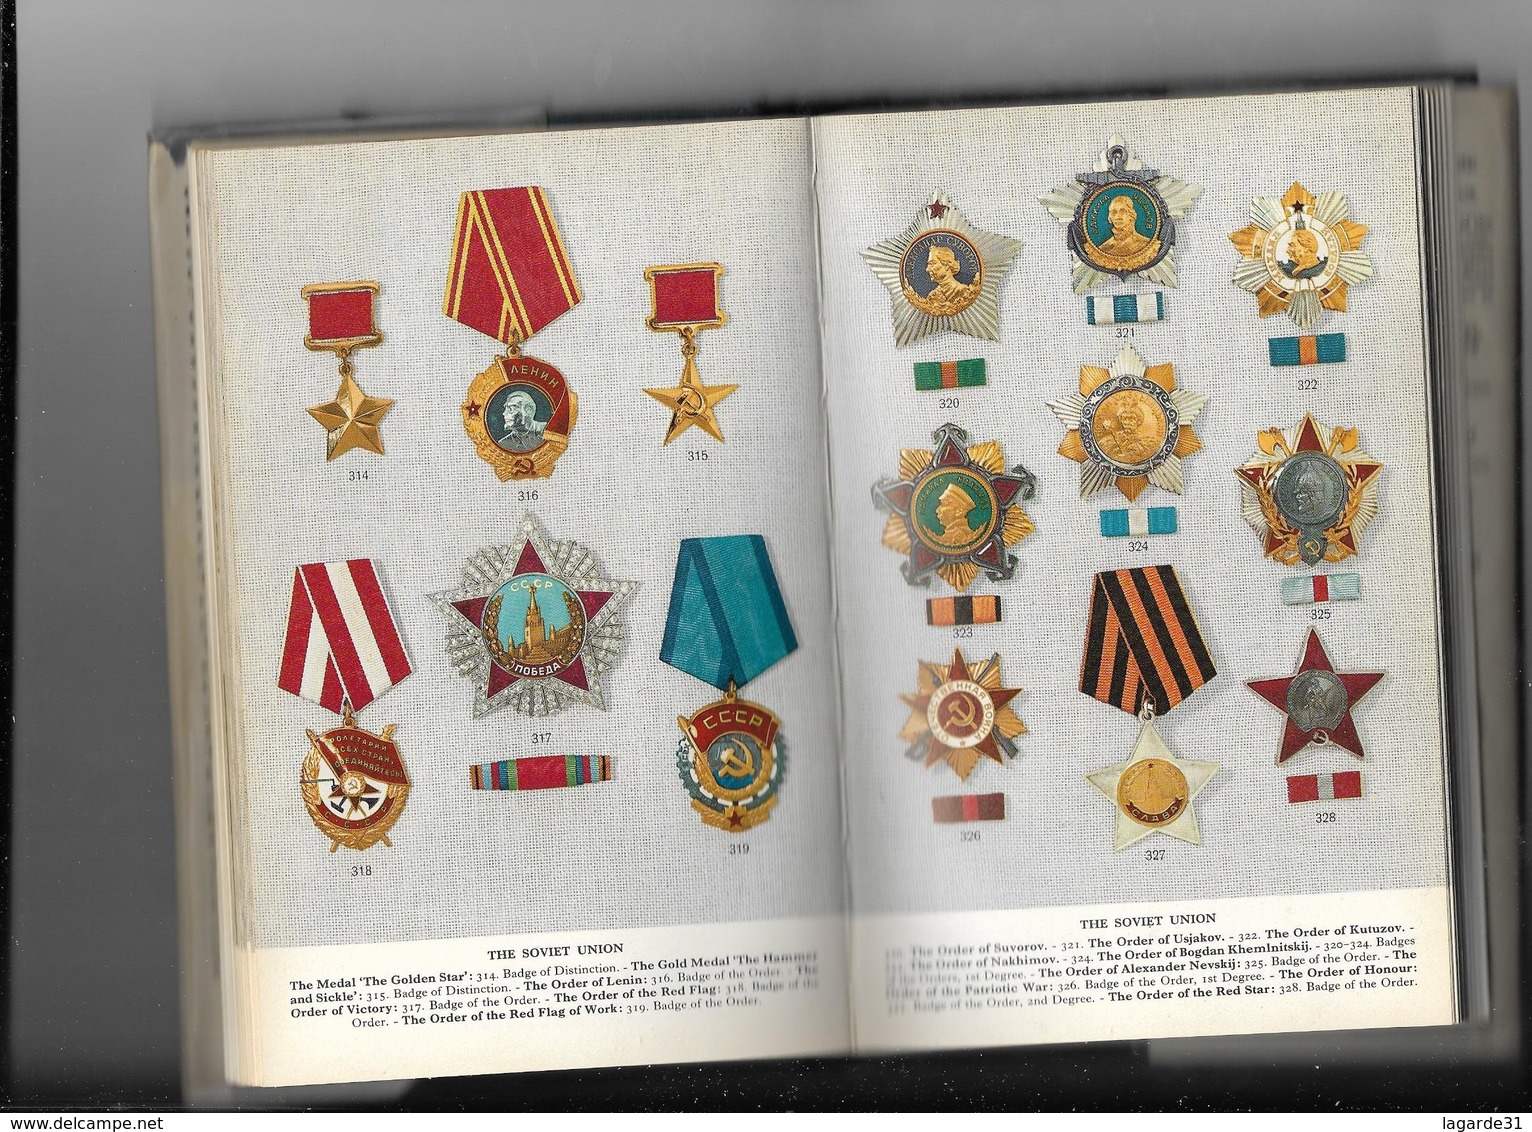 ORDERS MEDALS AND DECORATIONS OF BRITAIN AND EUROPE IN COLOUR - 1967 - Royaux / De Noblesse